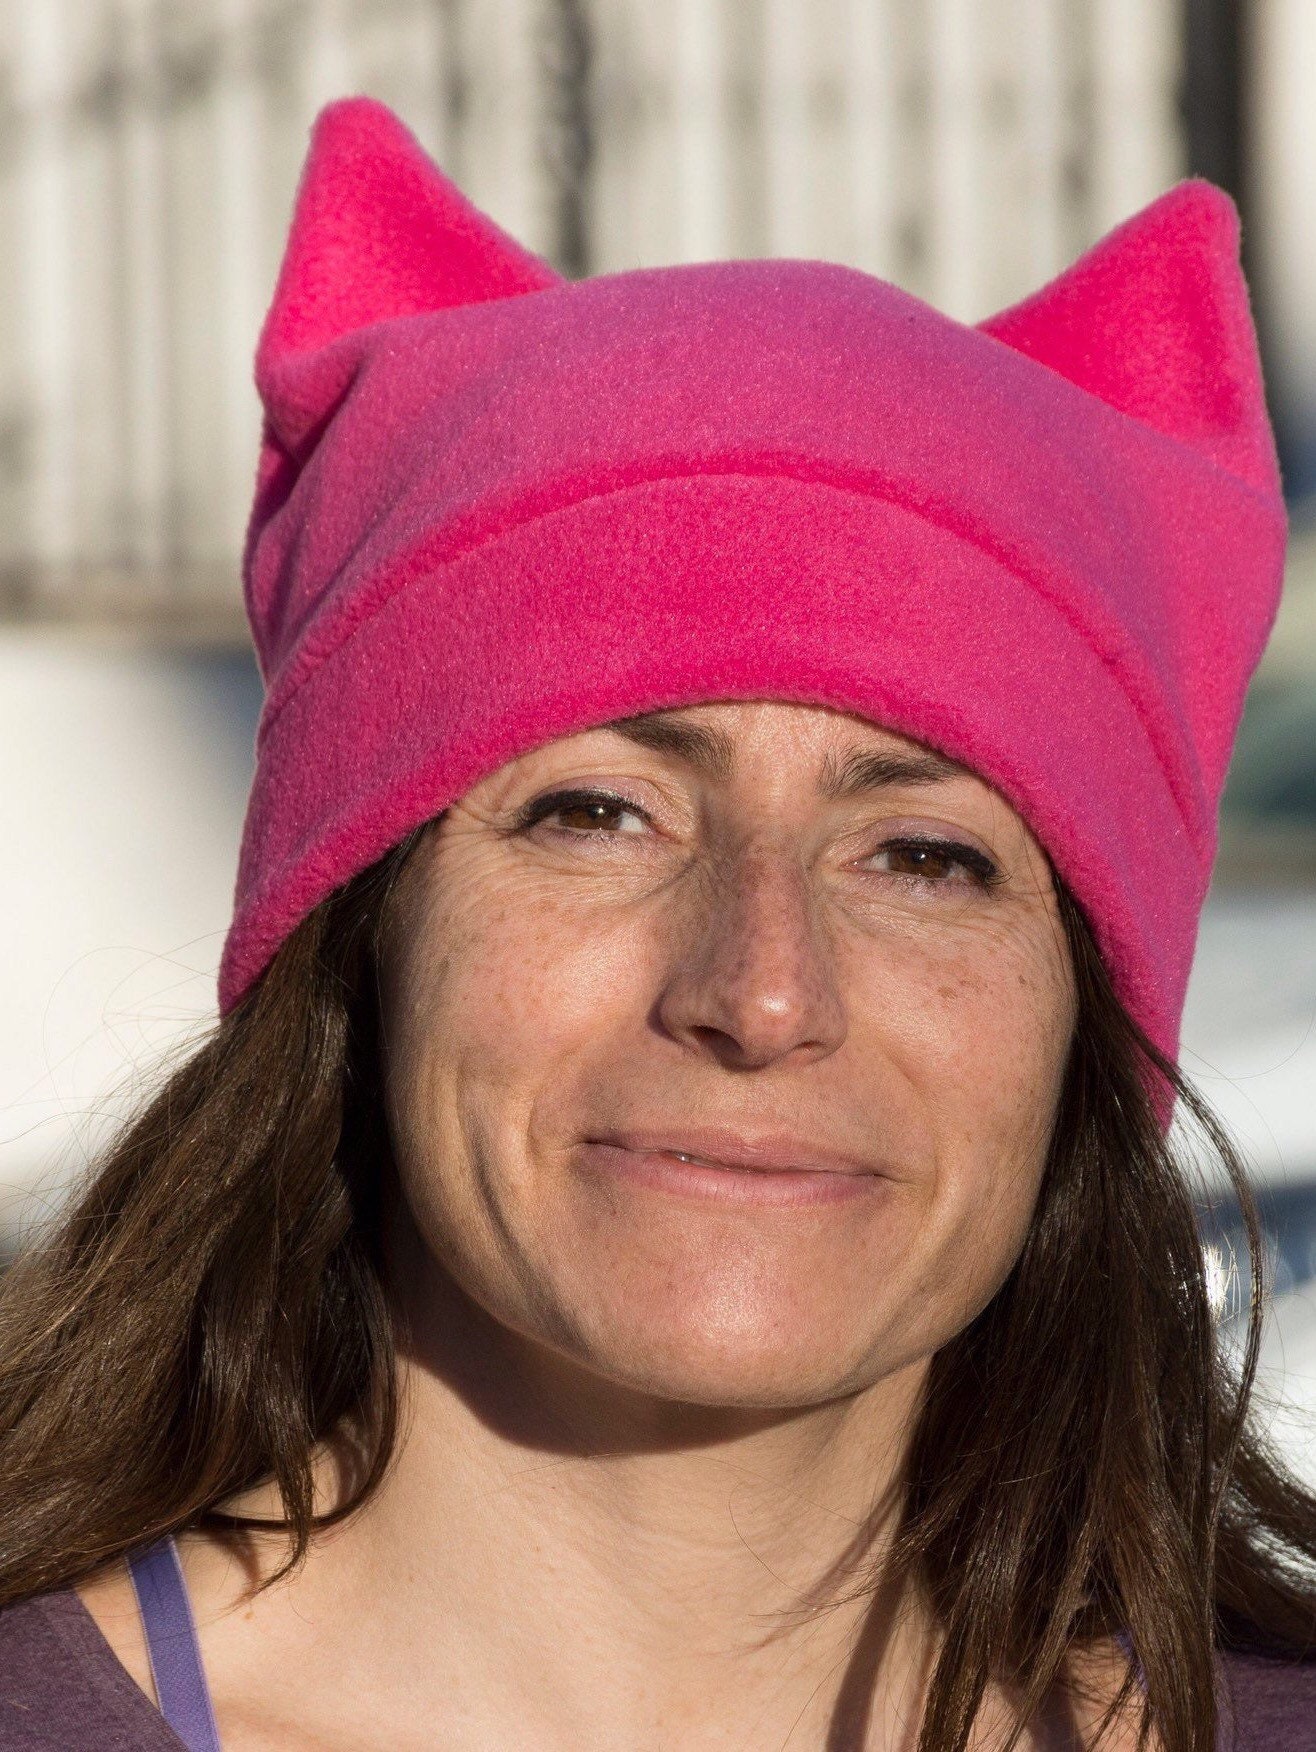 Burka with pink pussy hat